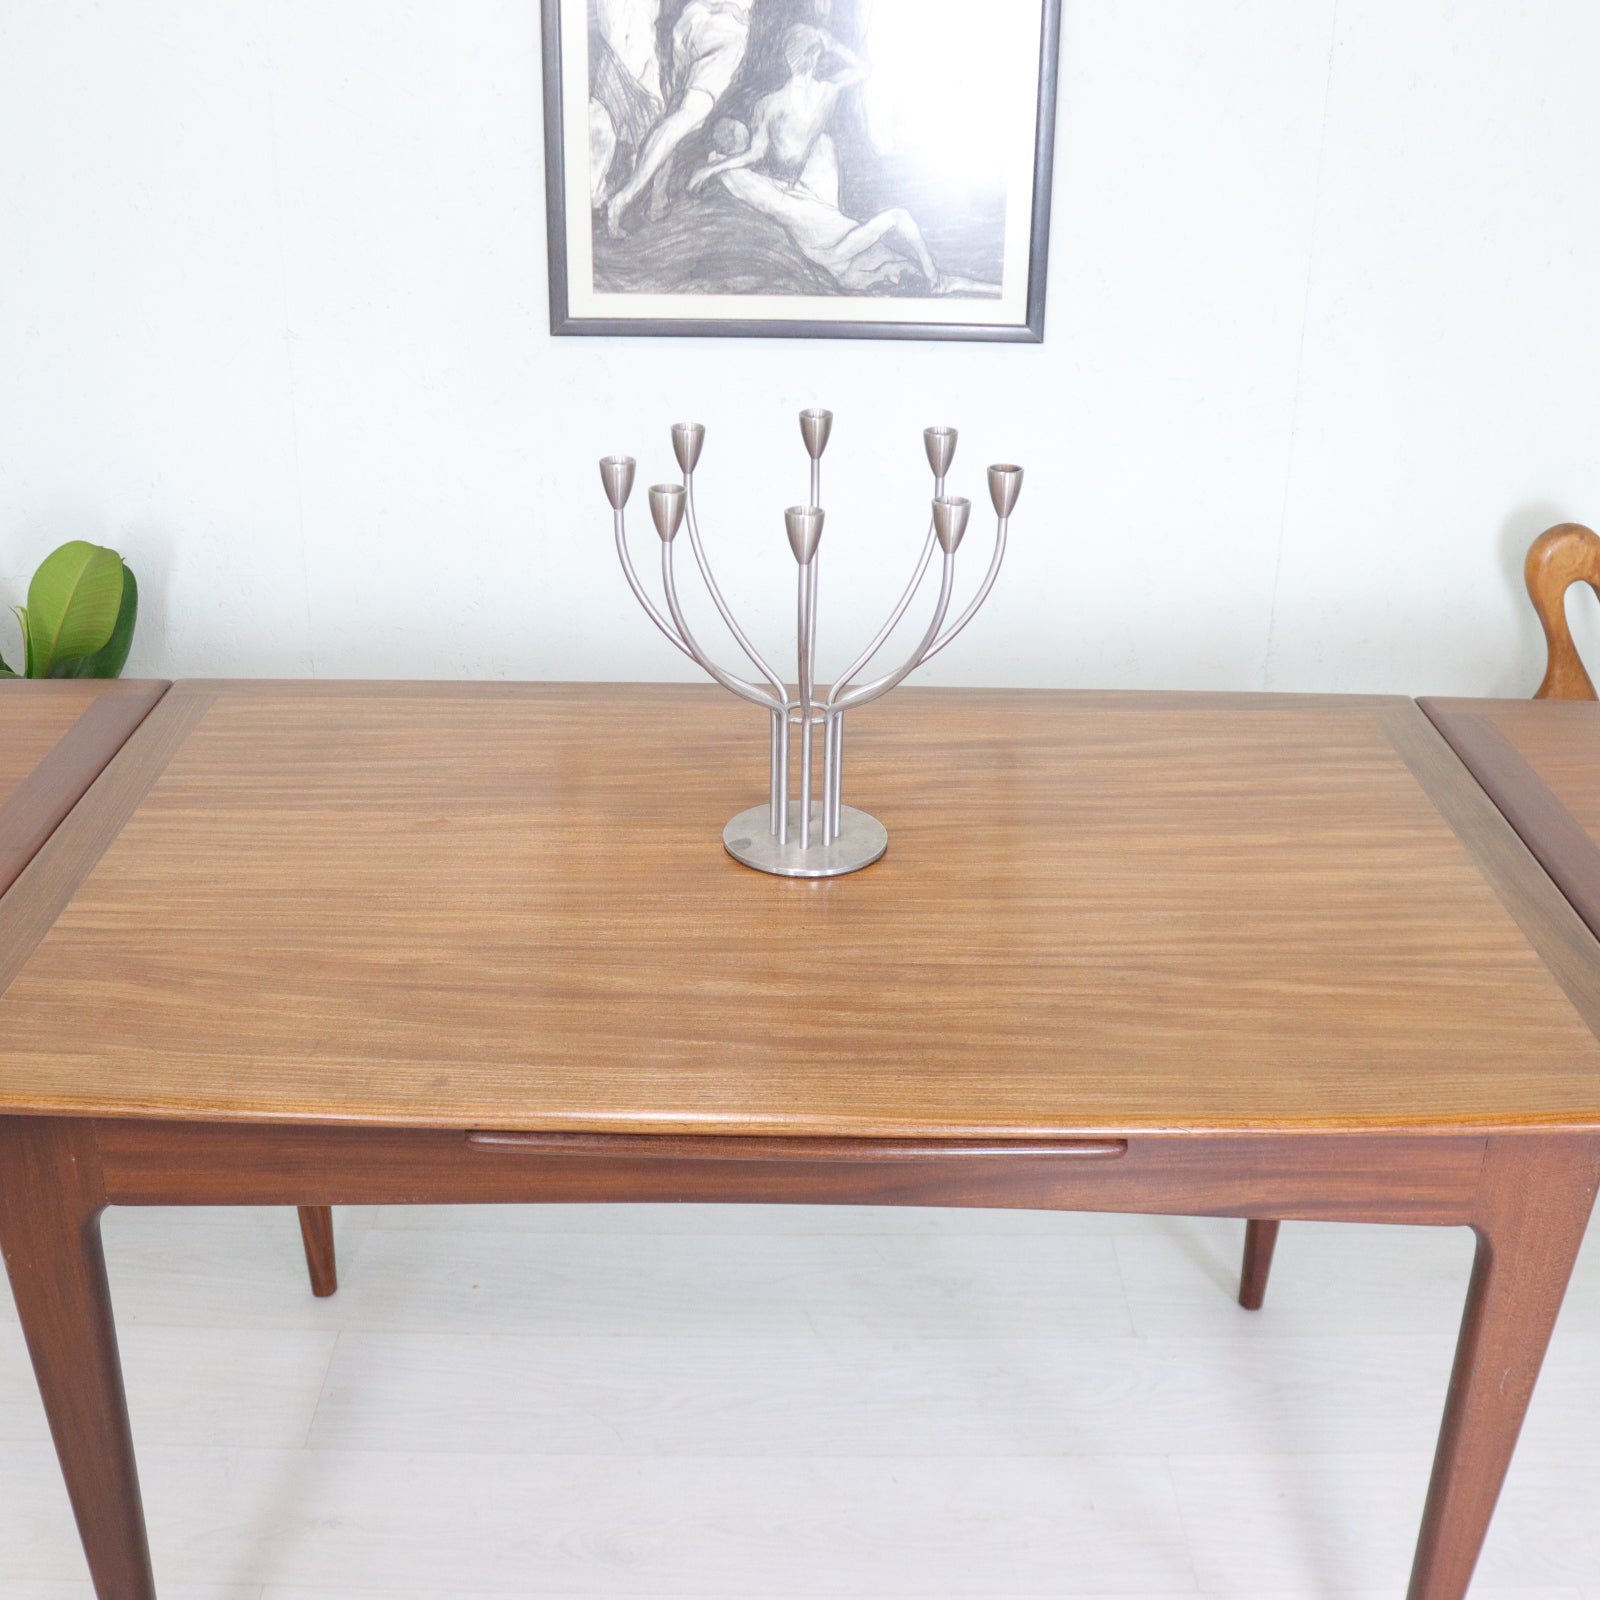 Custom listing for Younger Teak and Afromosia Extending Dining Table and Two leather Boss Chairs - teakyfinders